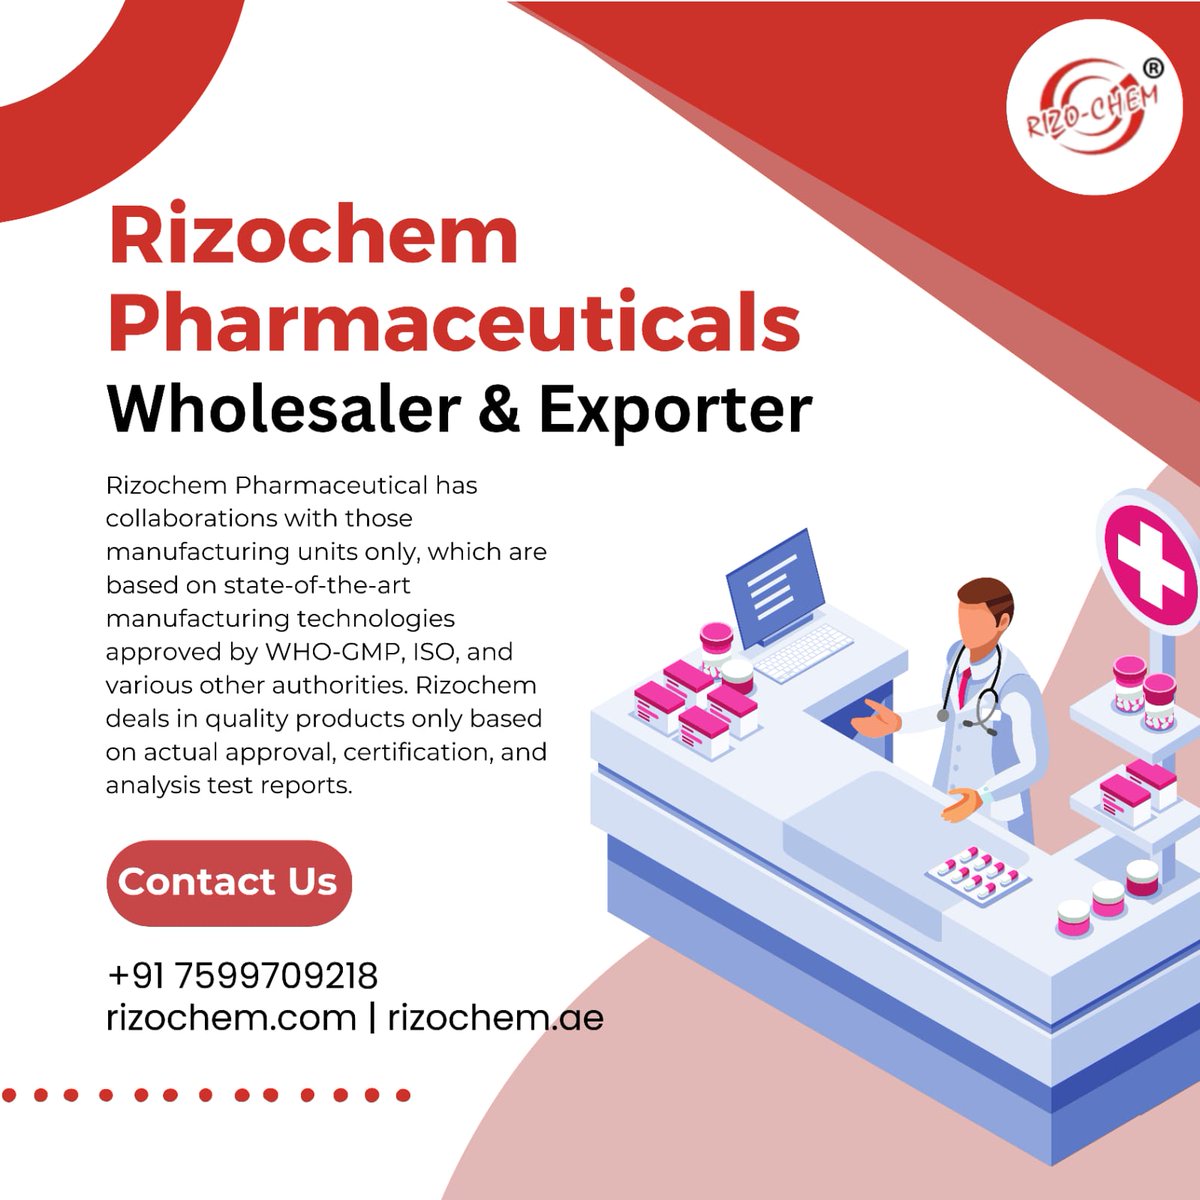 Rizochem Pharmaceutical has collaborations with those manufacturing units only, which are based on state-of-the-art manufacturing technologies approved by WHO-GMP, ISO, and various other authorities.
#afldeesdogs #aflfreolions #TrumpIsBroke #WICC2024 #MAFS